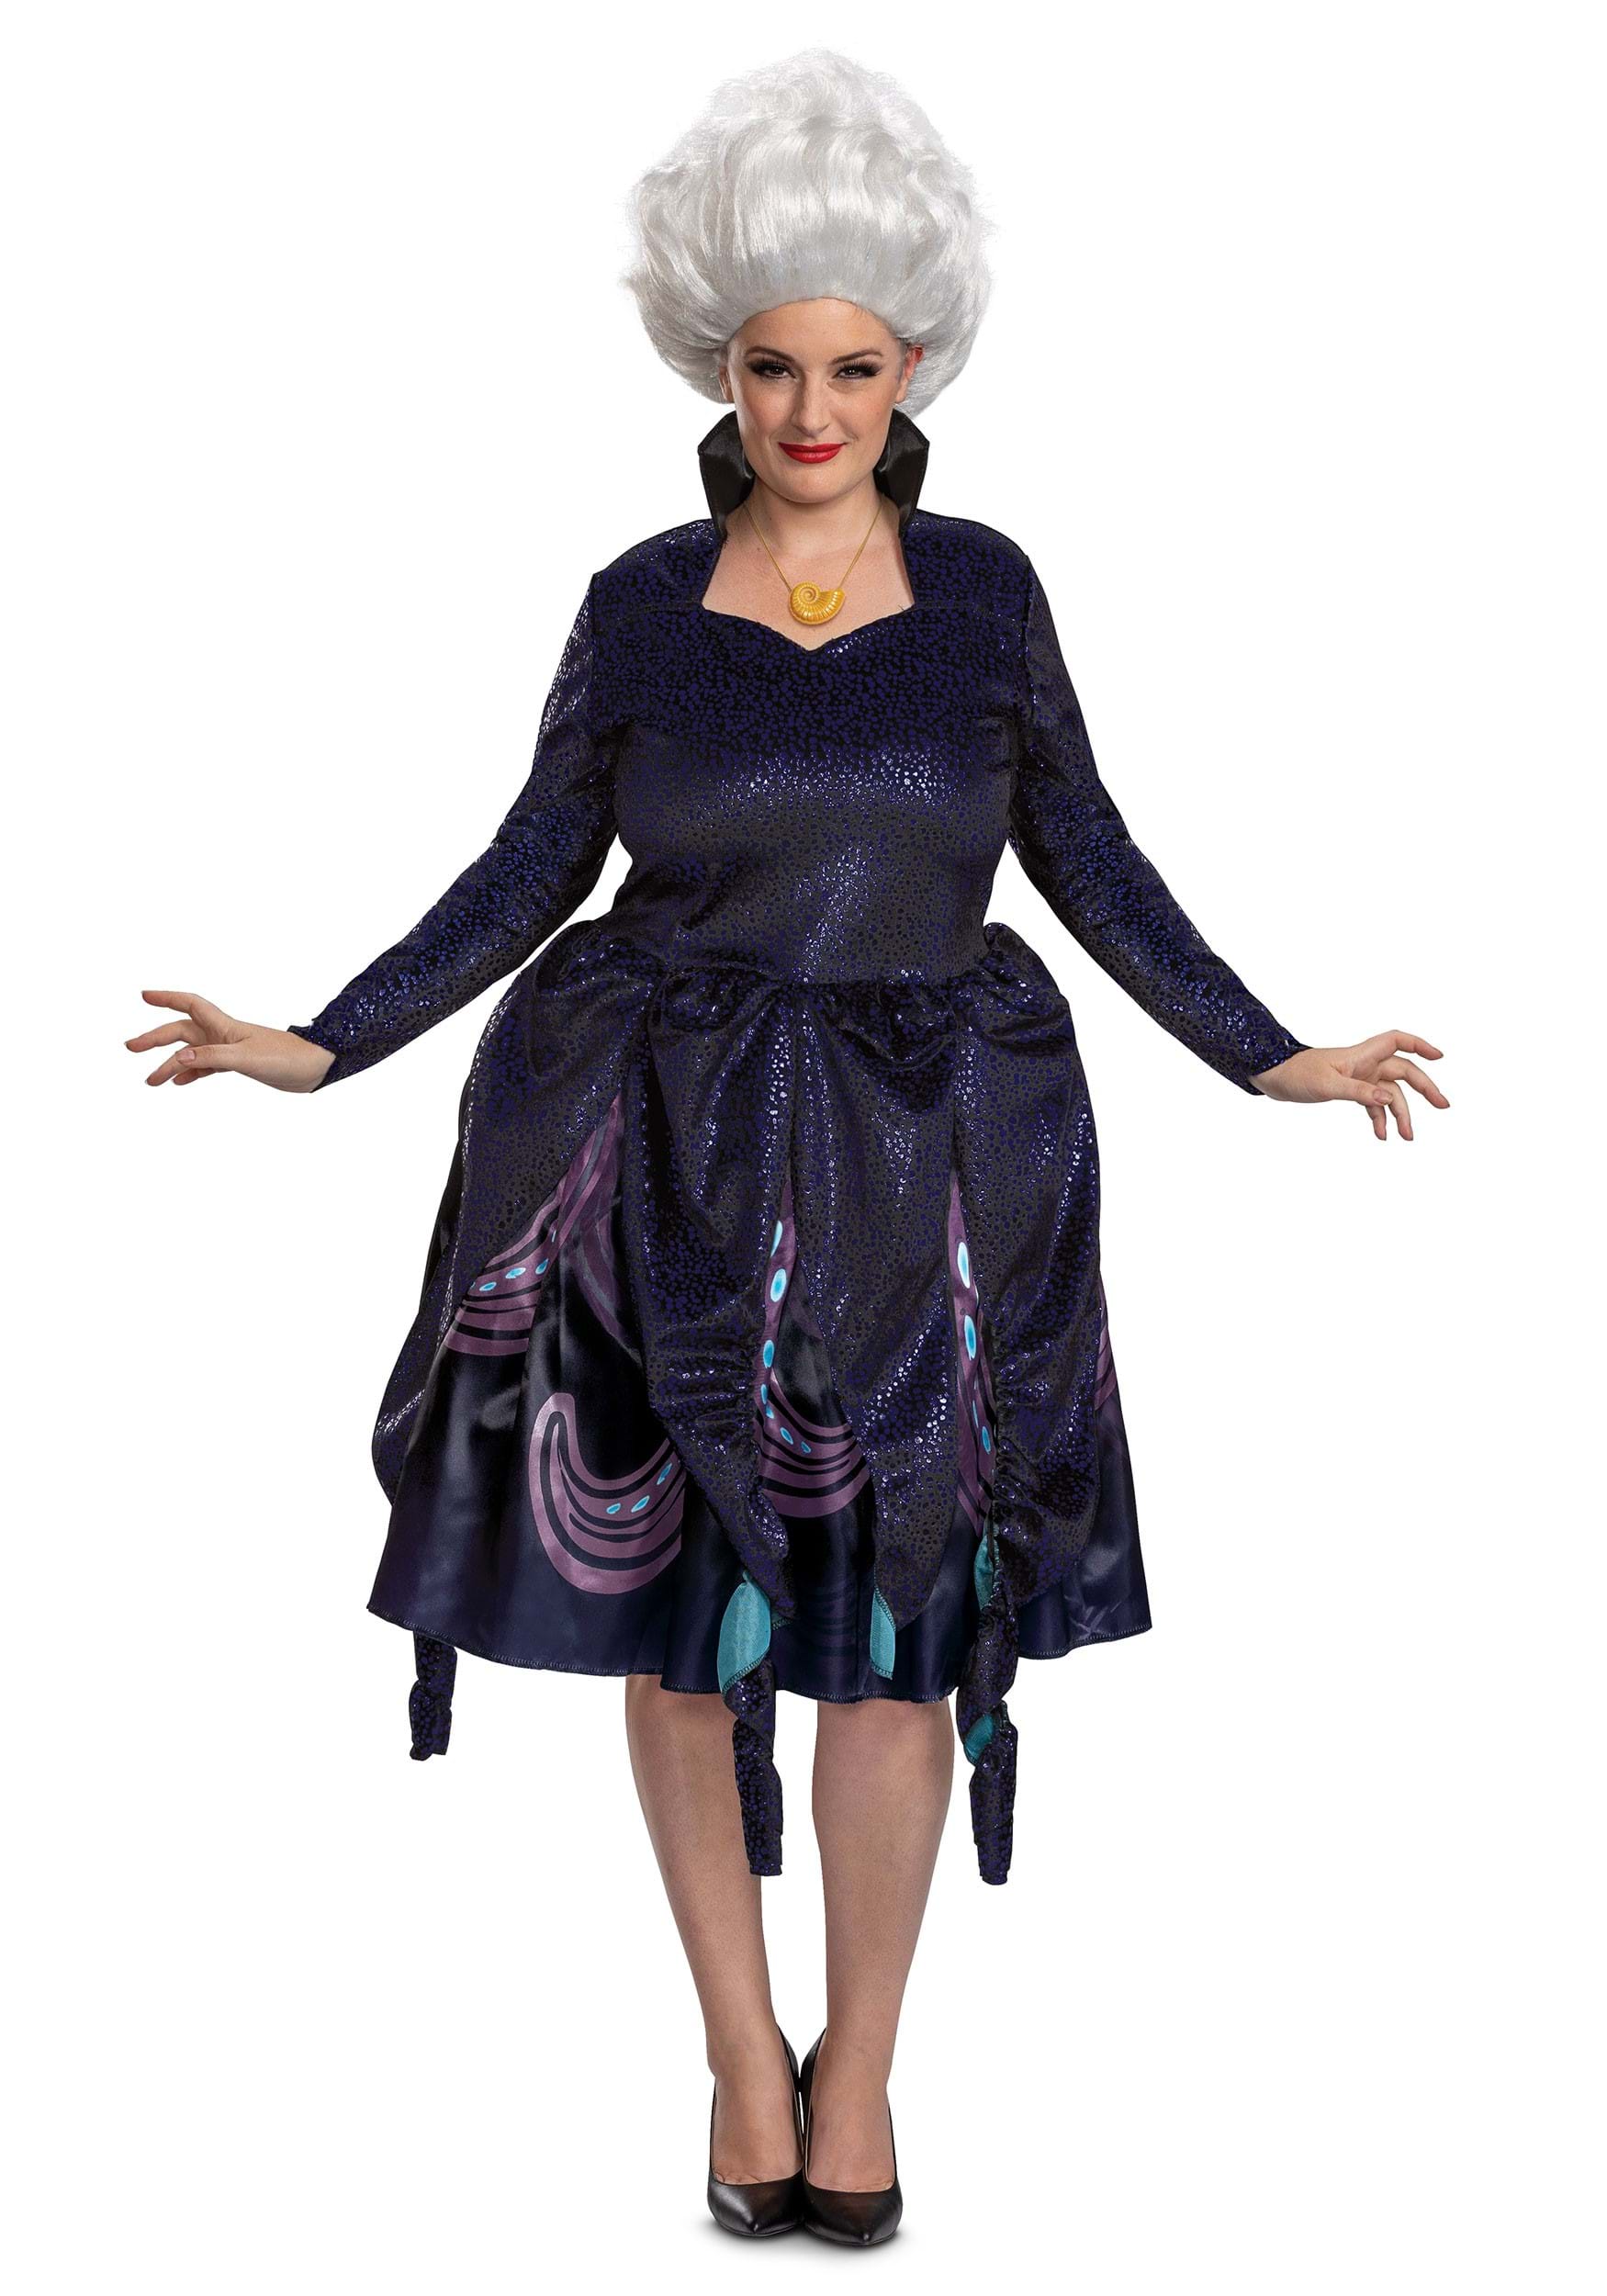 Image of Adult Little Mermaid Live Action Deluxe Ursula Costume ID DI125629-XL